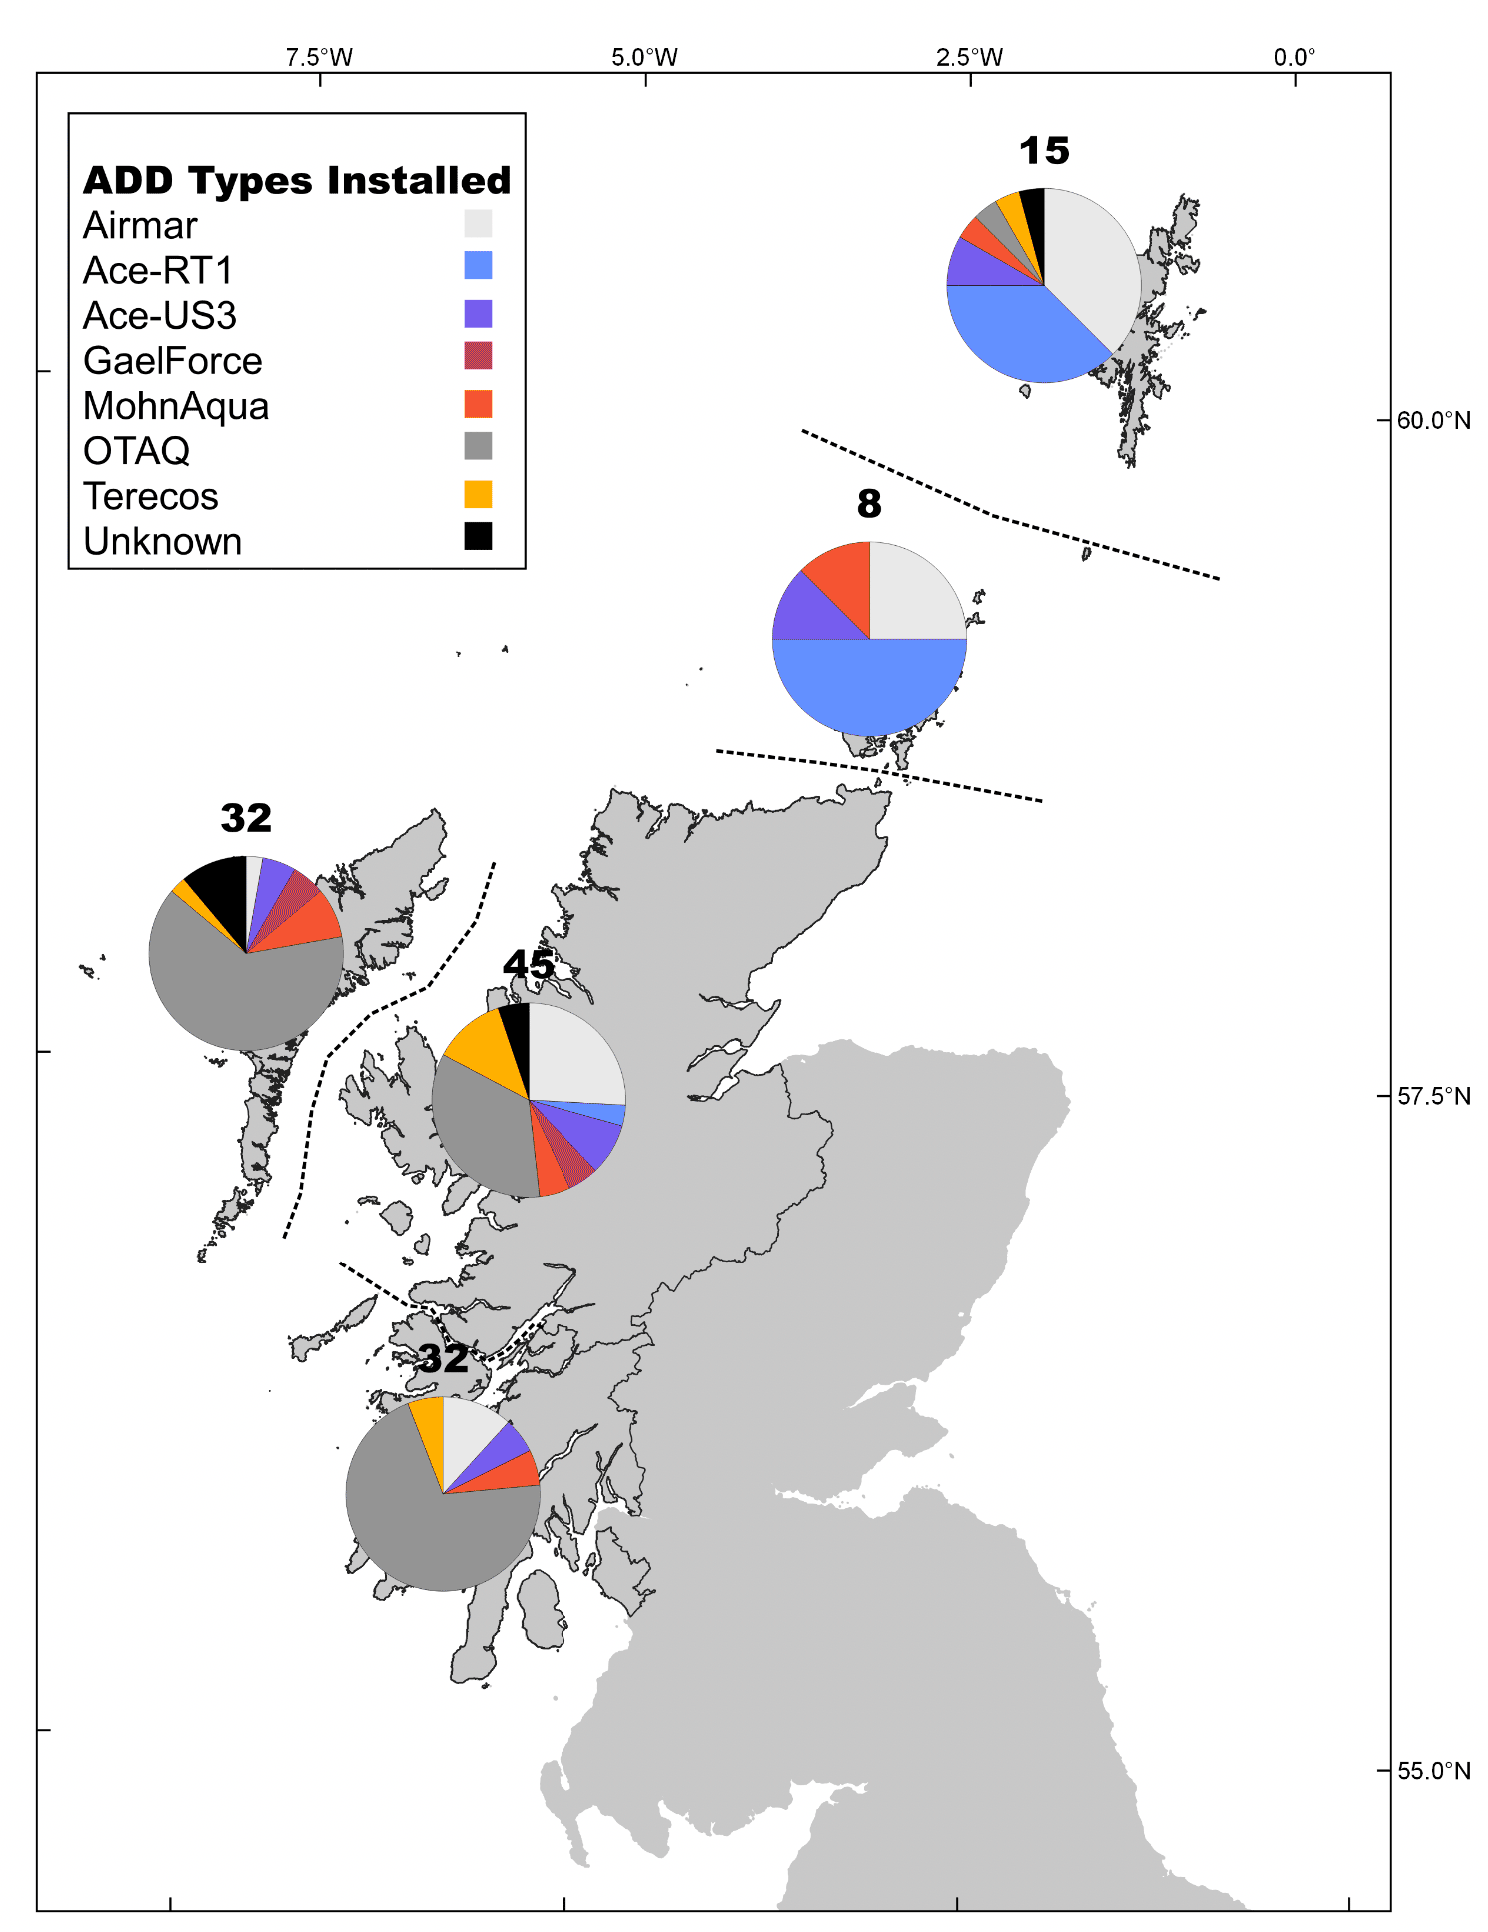 A map showing the regional differences in the proportional use of ADD types in winter 2019-2020. Figures for the ADD types used are available in Table 3.